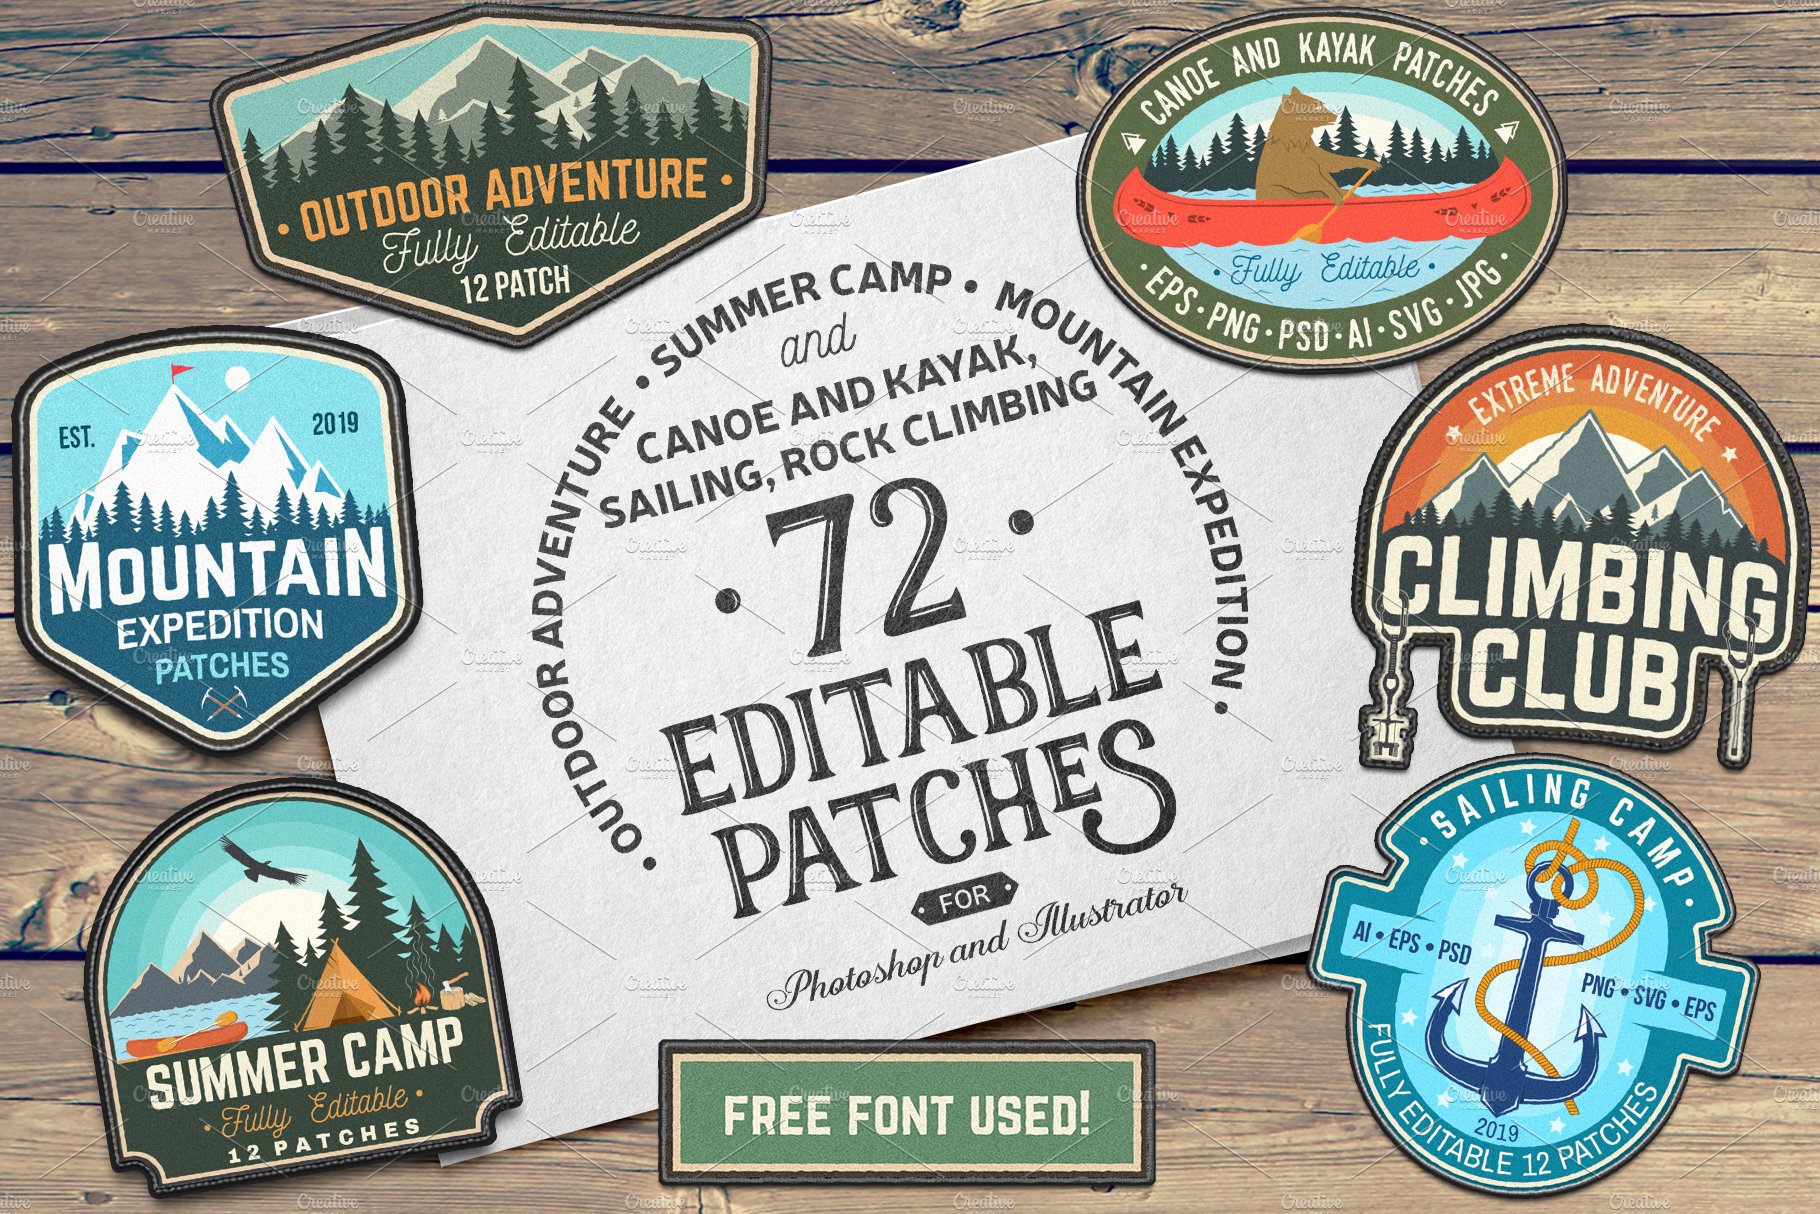 Outdoor Adventure Patches/Badges cover image.